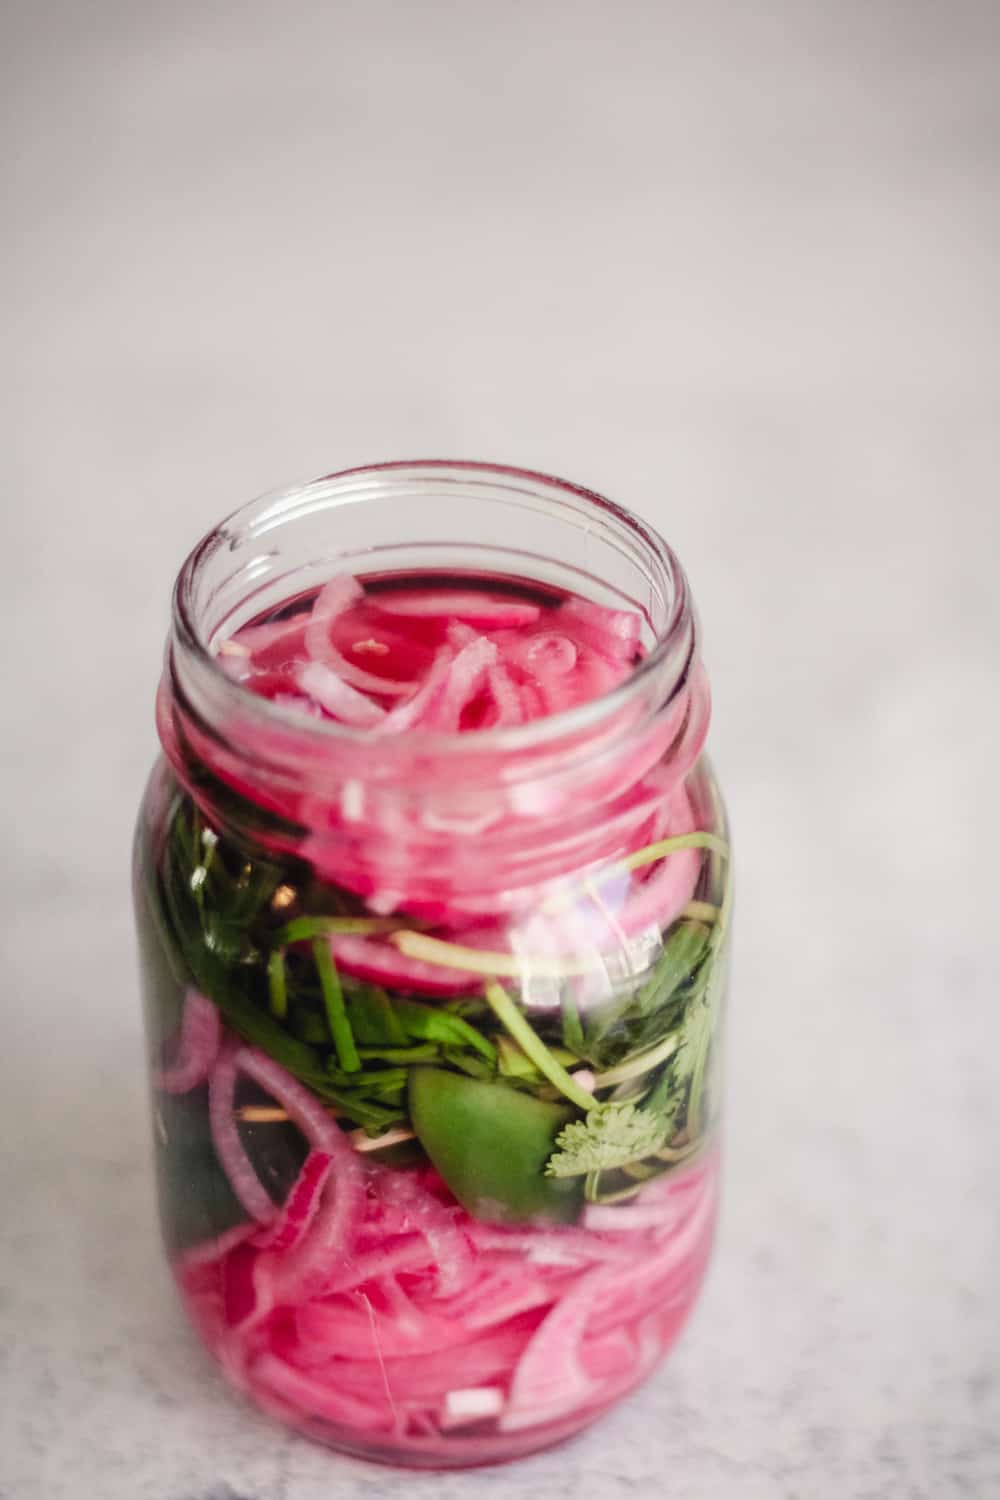 Pickled red onions in a glass jar with jalapeño and herbs.